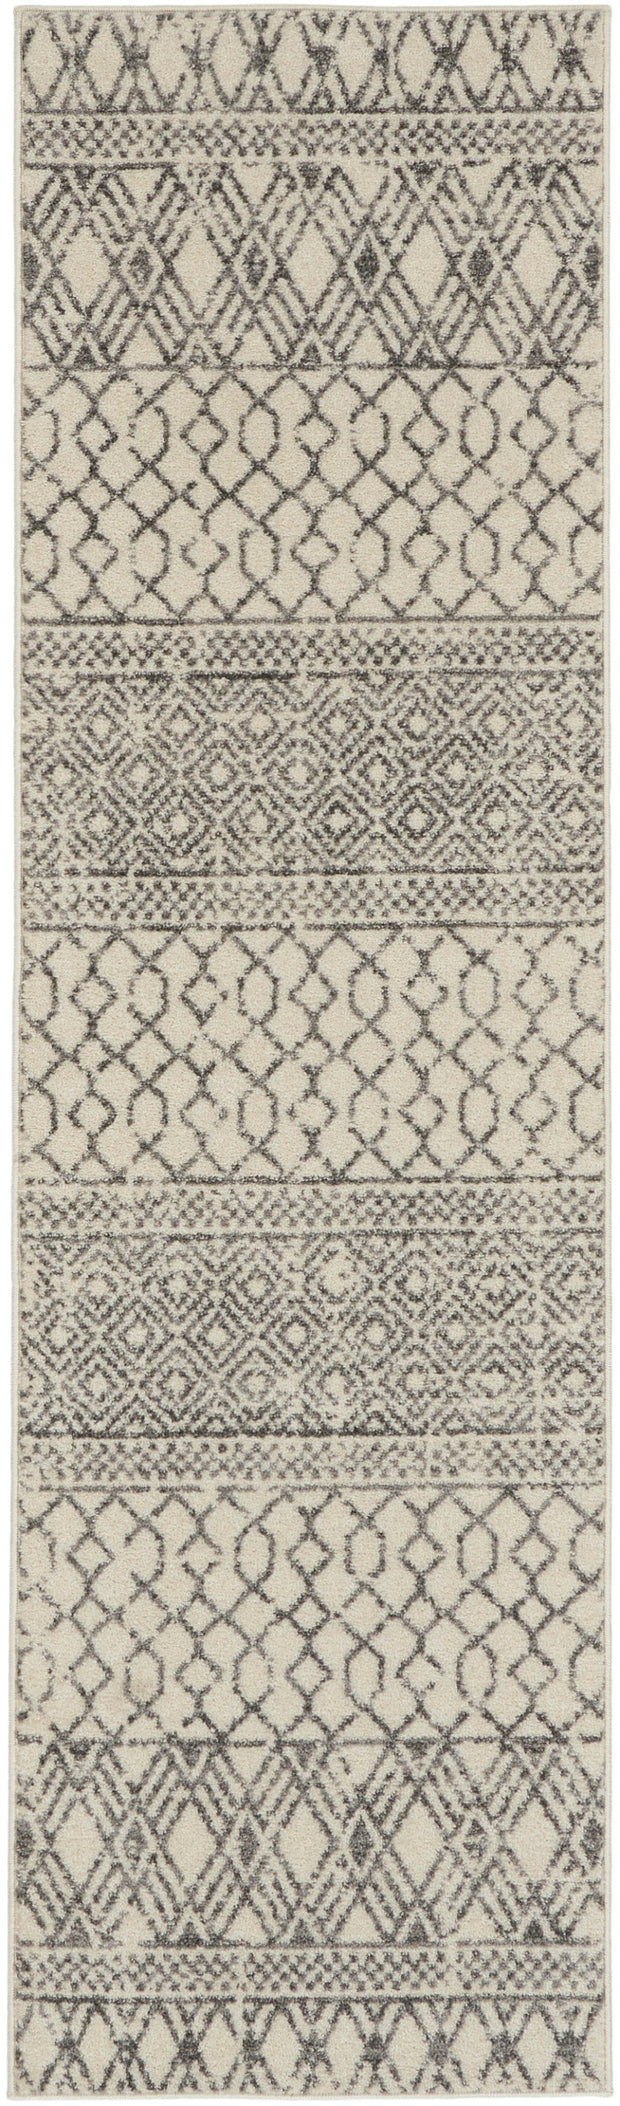 passion ivory grey rug by nourison 99446793560 redo 2